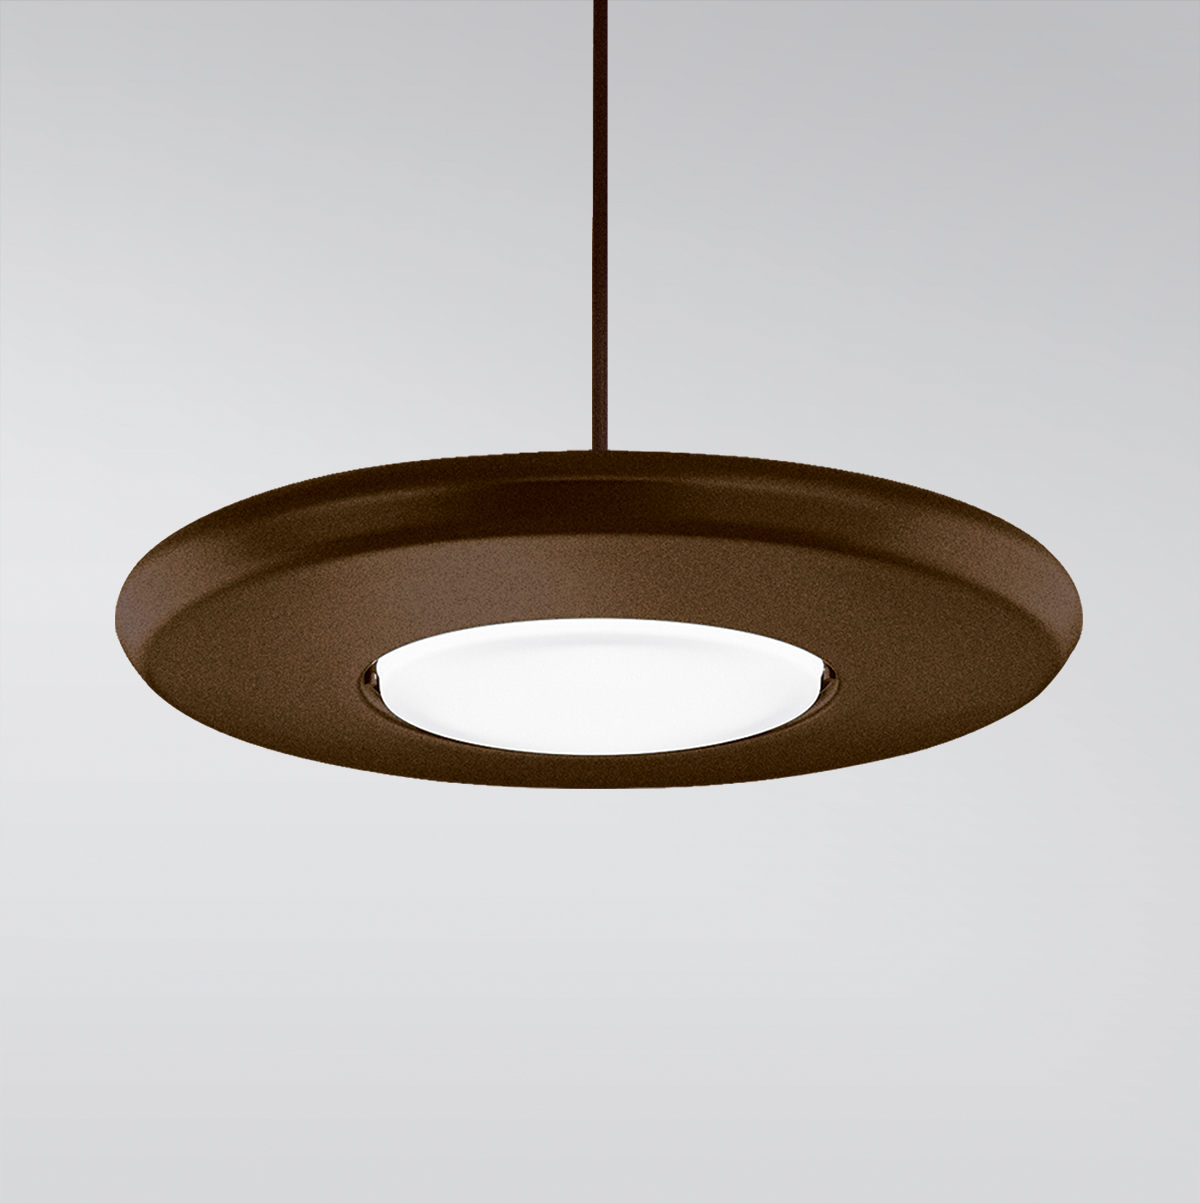 CP4454 Aries A round, disc-shaped pendant with a luminous downlight diffuser in the center